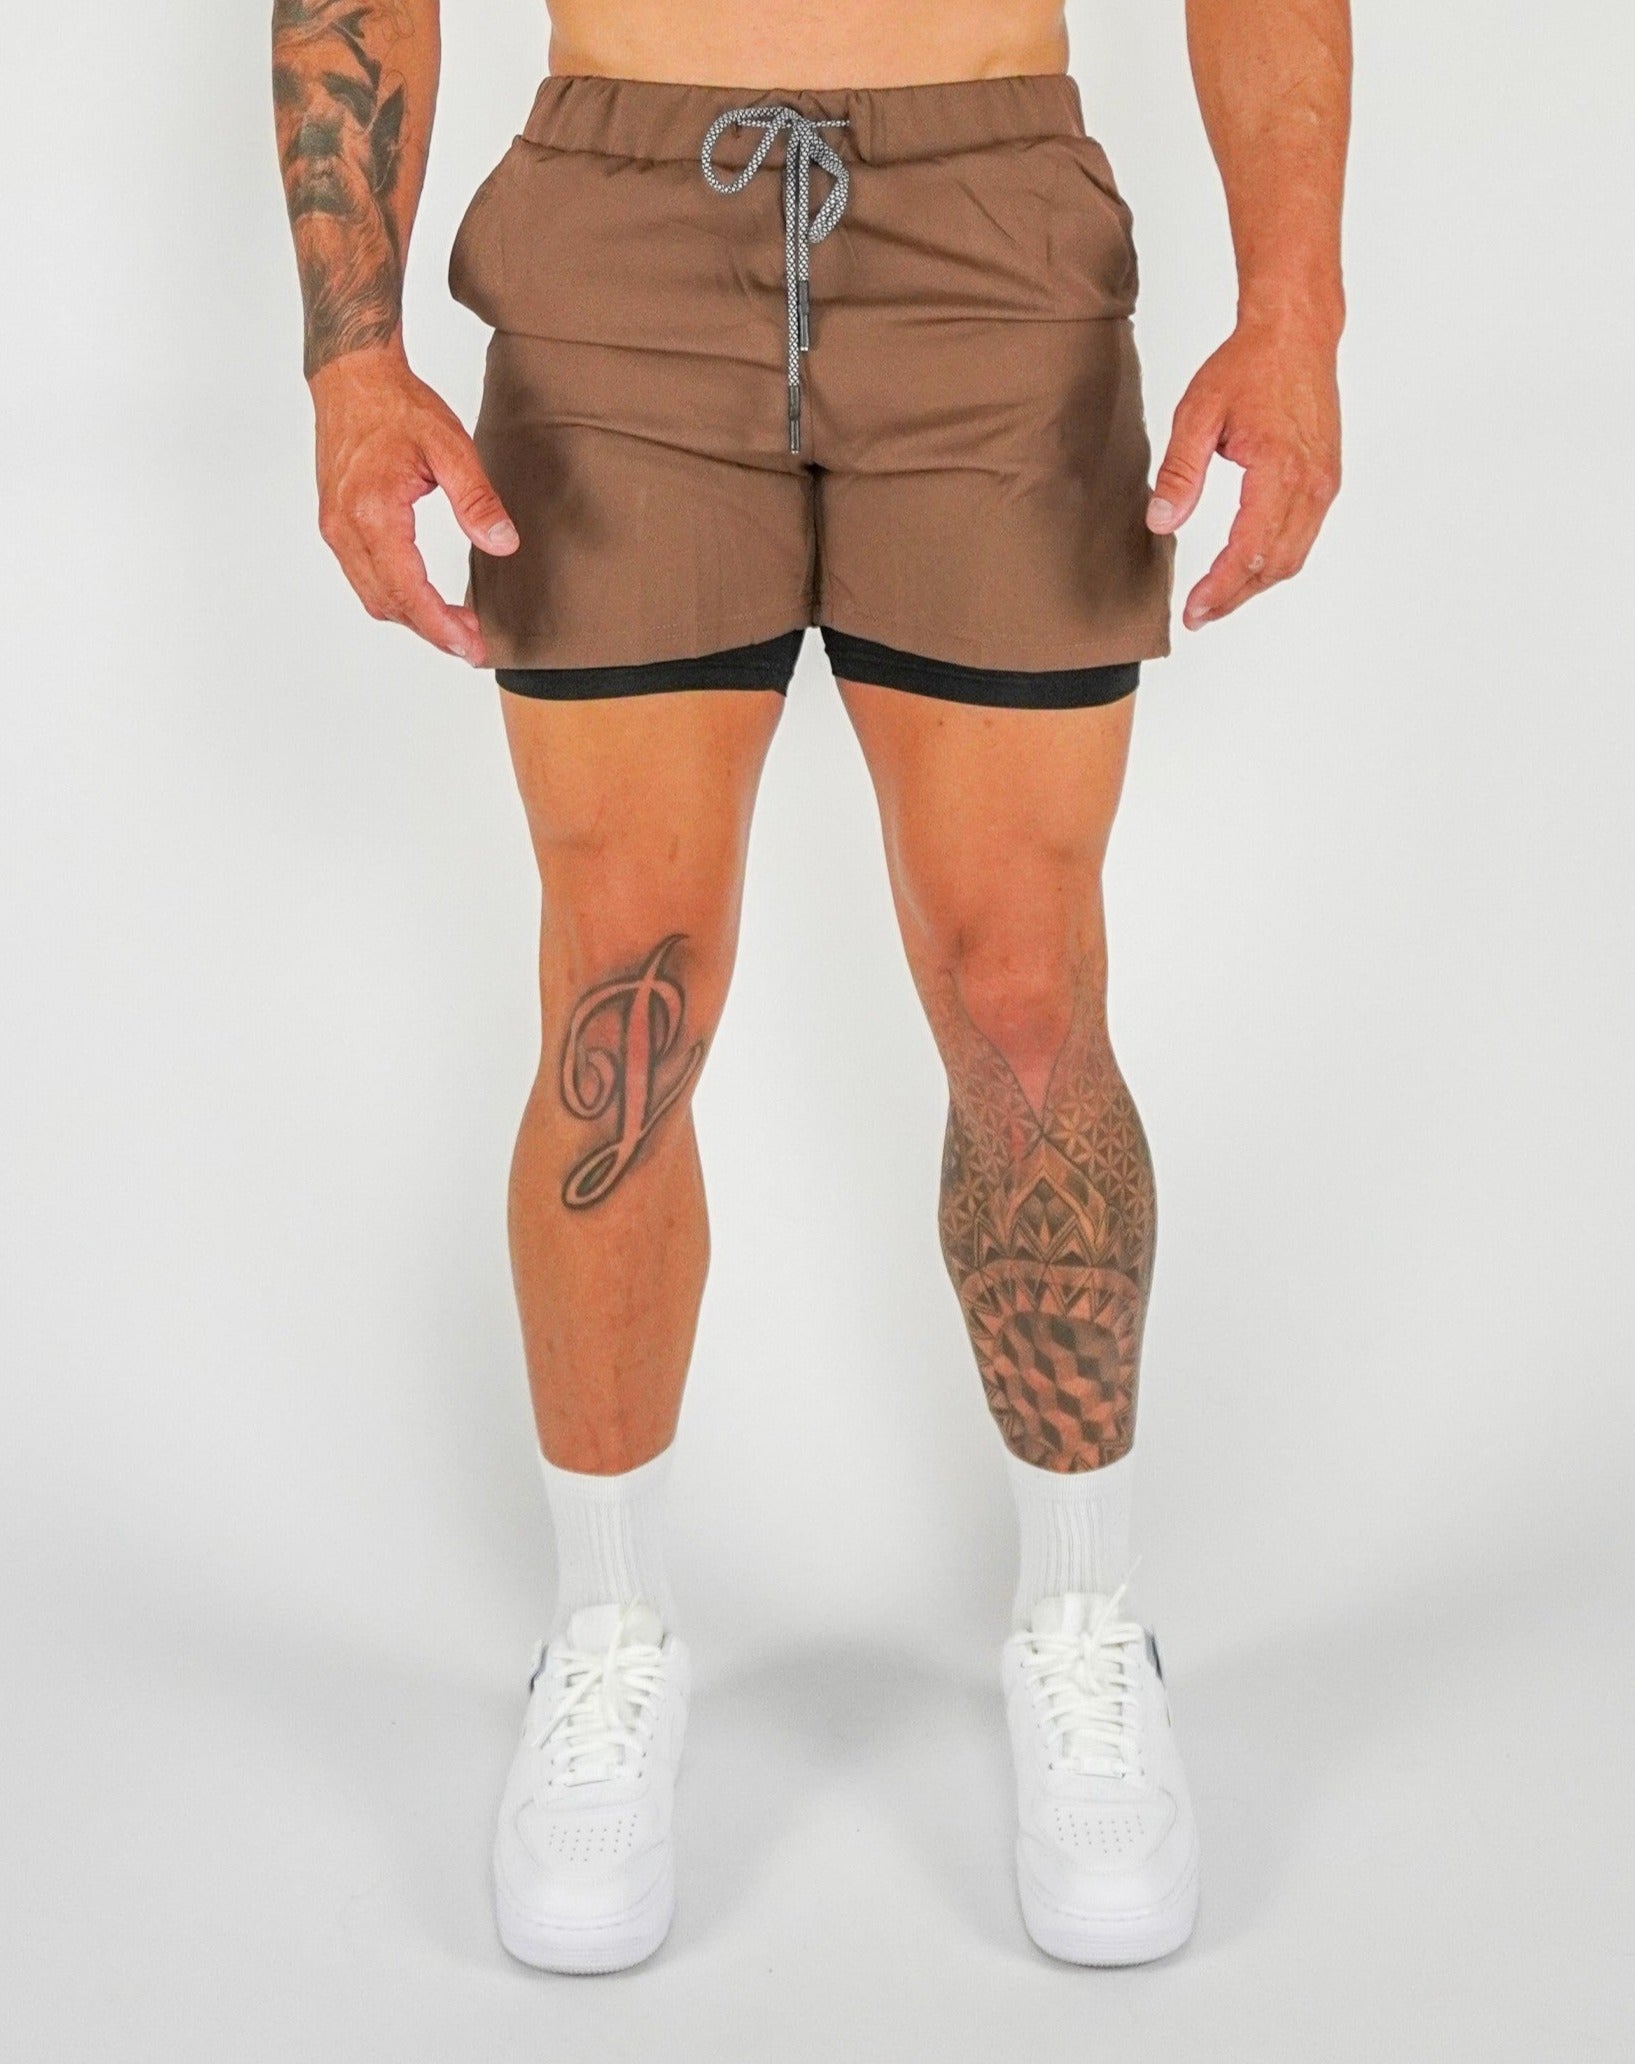 Culture 2-IN-1 Shorts - Chocolate - GYMROOS